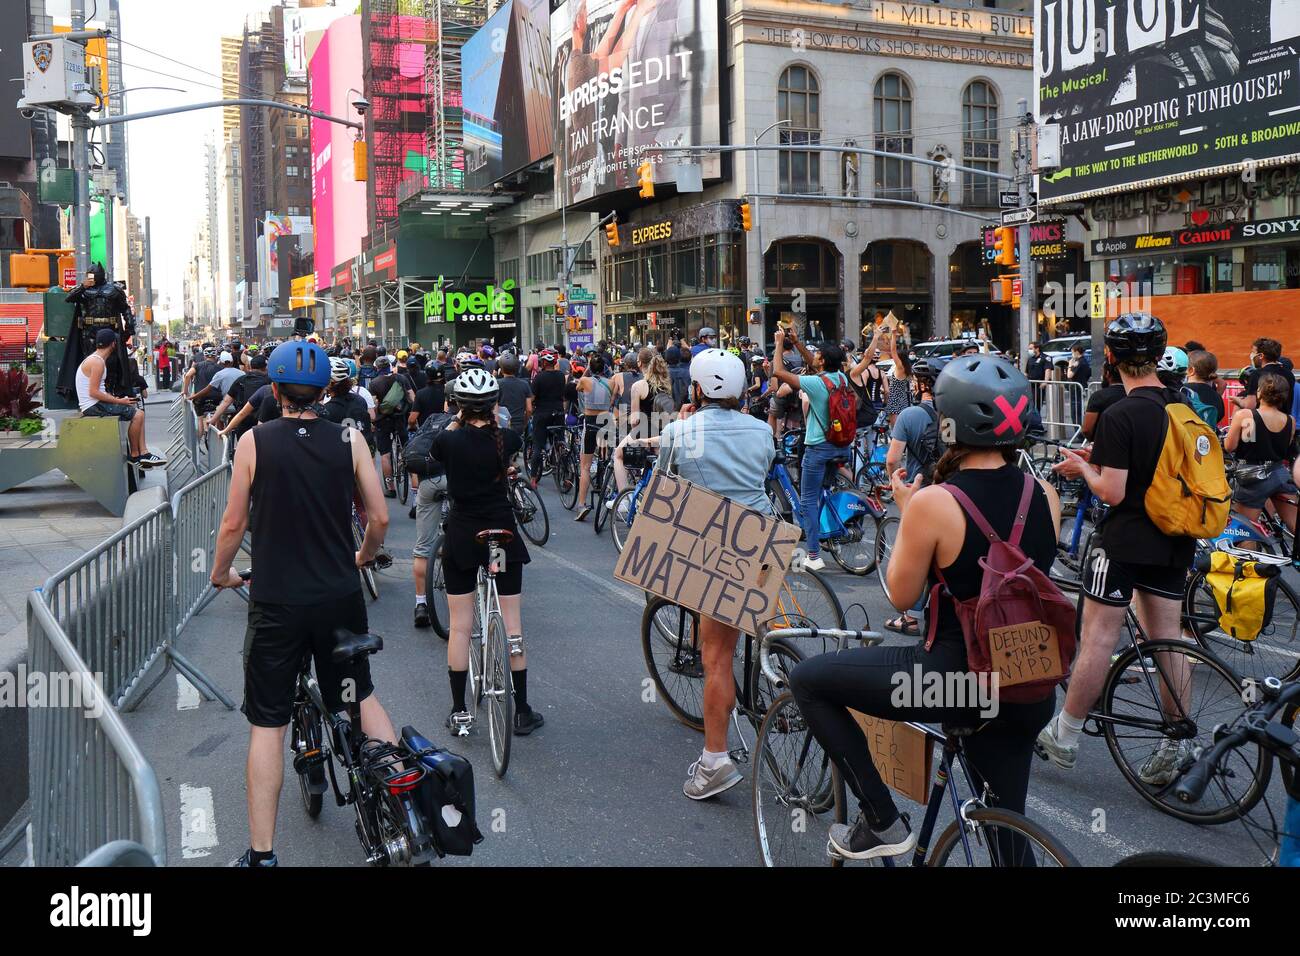 New York, NY. 20th June 2020. Protesters on bicycles in Times Square enclosed by police barricades. The bike protest was a Black Lives Matter solidarity ride calling for justice in a recent string of American police killings: George Floyd, Breonna Taylor, and countless others. The bike ride was organized by the collective called Street Riders NYC. Several thousand people participated in the moving demonstration travelling from Times Square, Harlem, and Battery Park. June 20, 2020 Stock Photo